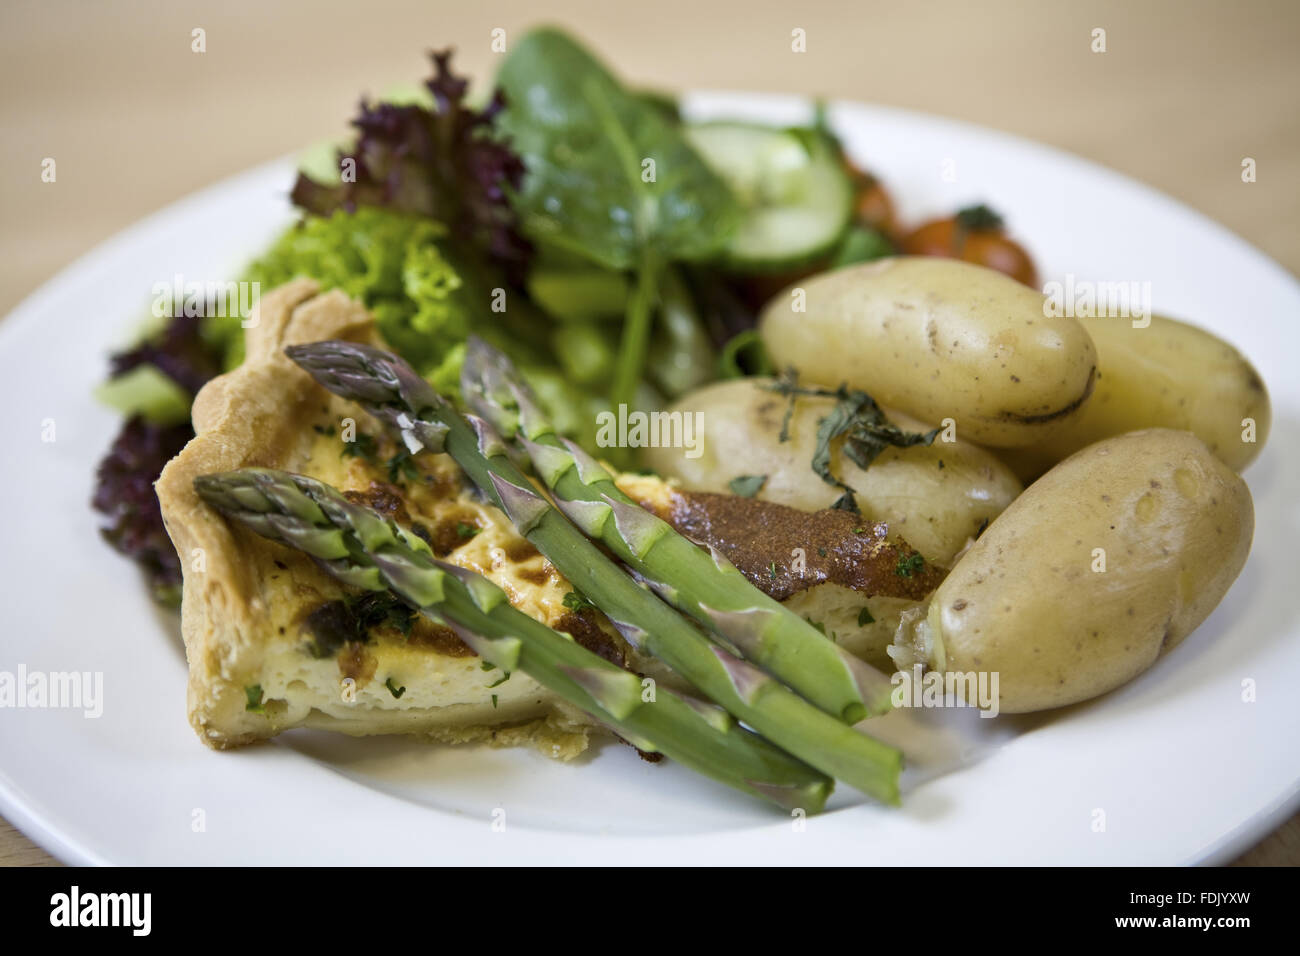 Quiche with asparagus and salad, available in the restaurant at Polesden Lacey, Surrey. Stock Photo